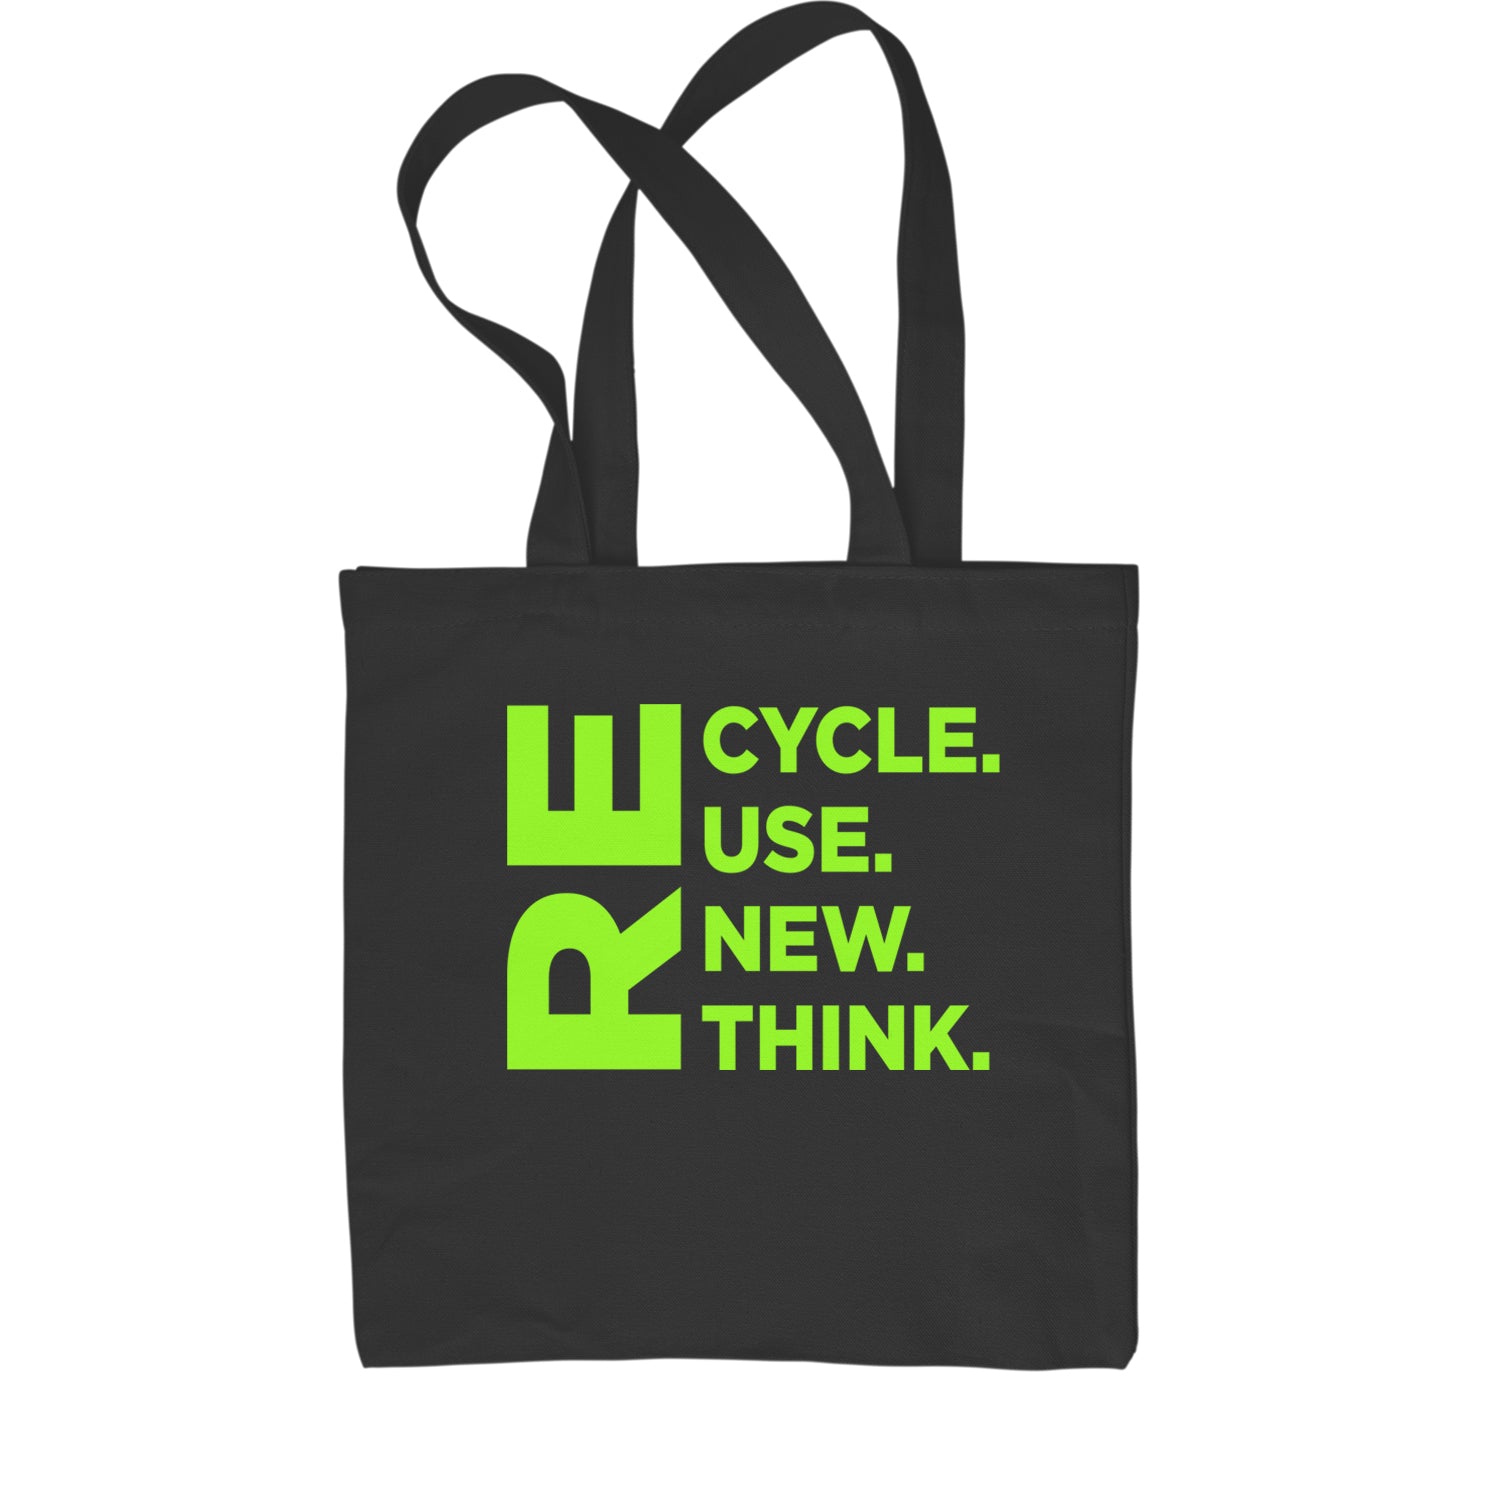 Recycle Reuse Renew Rethink Earth Day Crisis Environmental Activism  Shopping Tote Bag